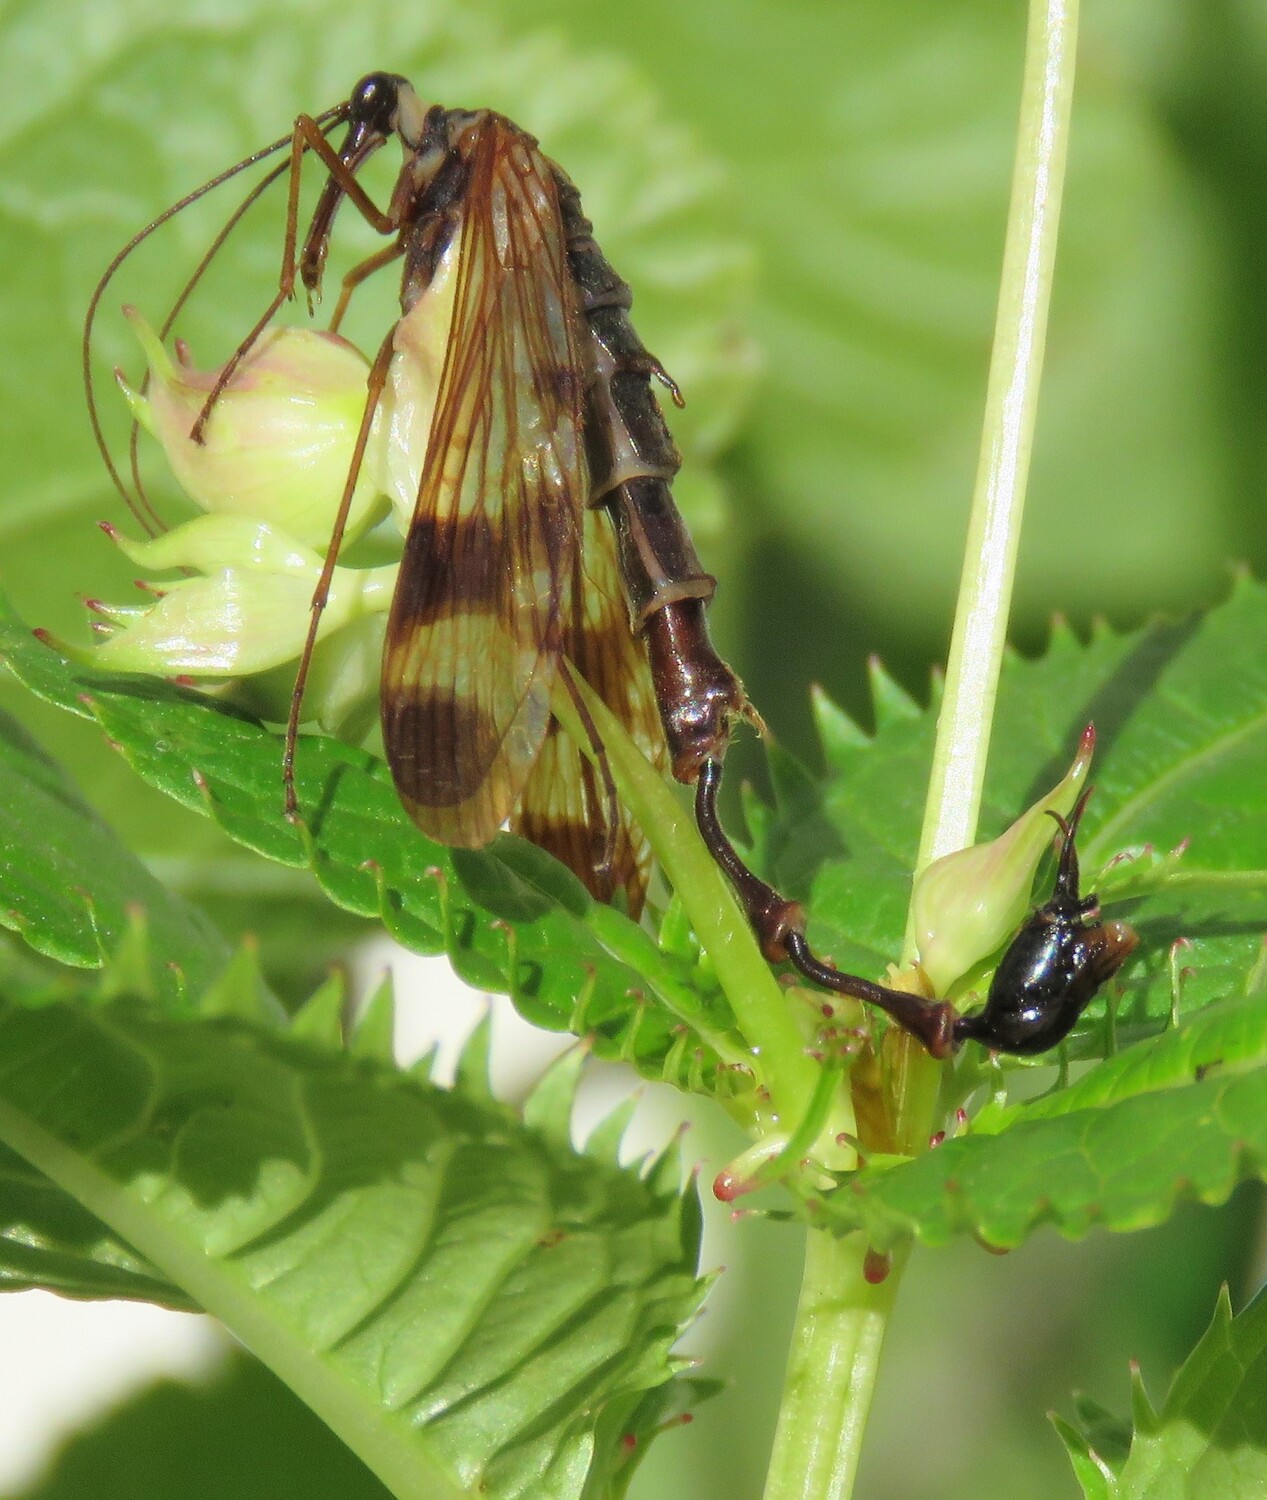 A newly discovered species of large scorpionfly from Nepal named Lulilan obscurus. In addition to the long head, characteristic of all scorpionflies, its very elongated abdomen is striking. It is described by Emeritus Professor Rainer Willmann, University of Göttingen, together with other species that make up a new genus of scorpionfly named Lulilan.